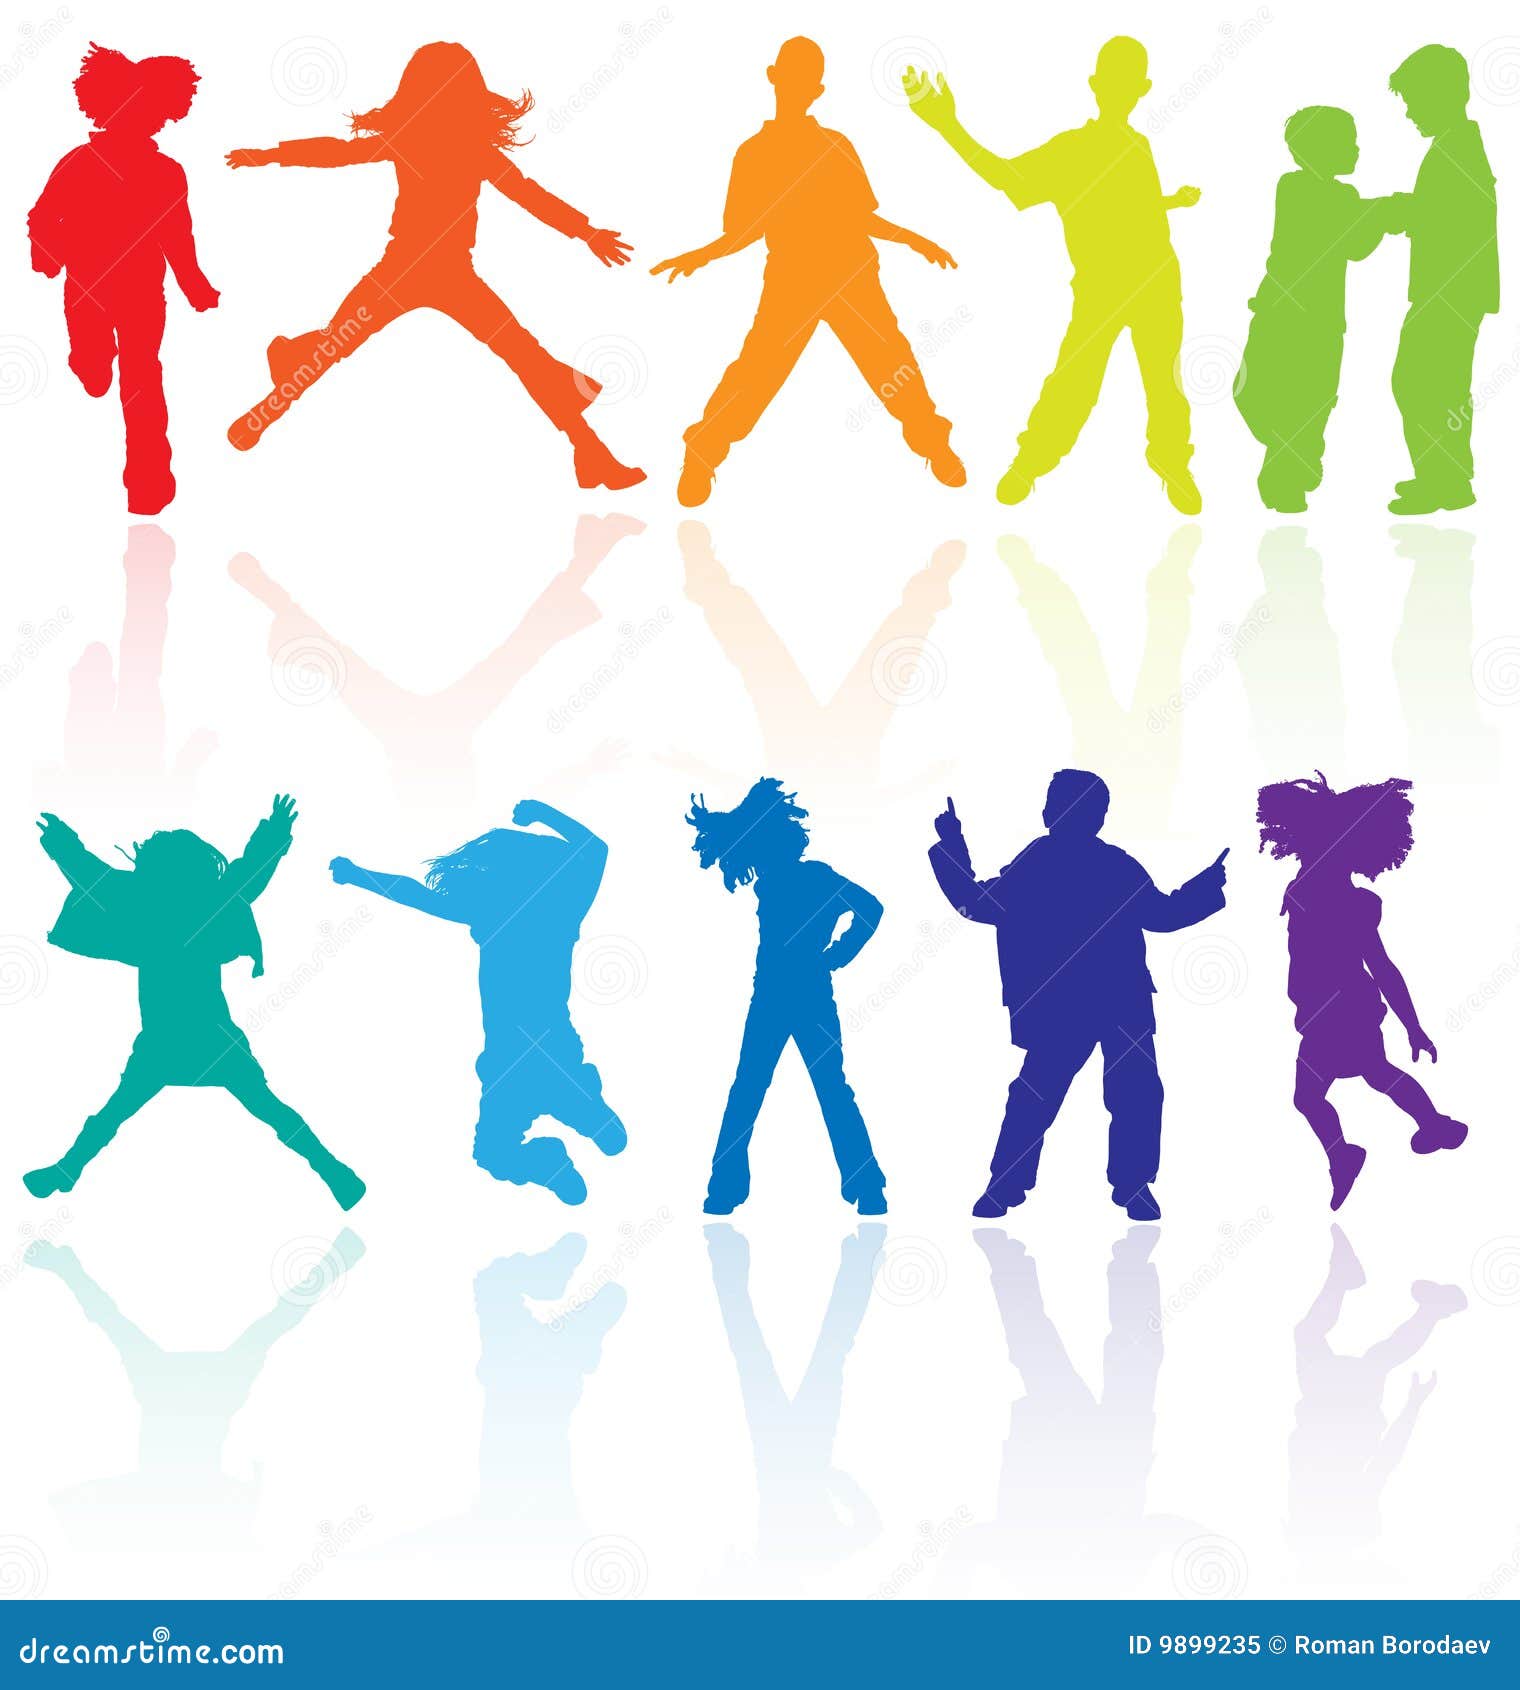 kids silhouette children silhouettes dancing dance playing  kid youth child teens school jumping teenagers club party happy